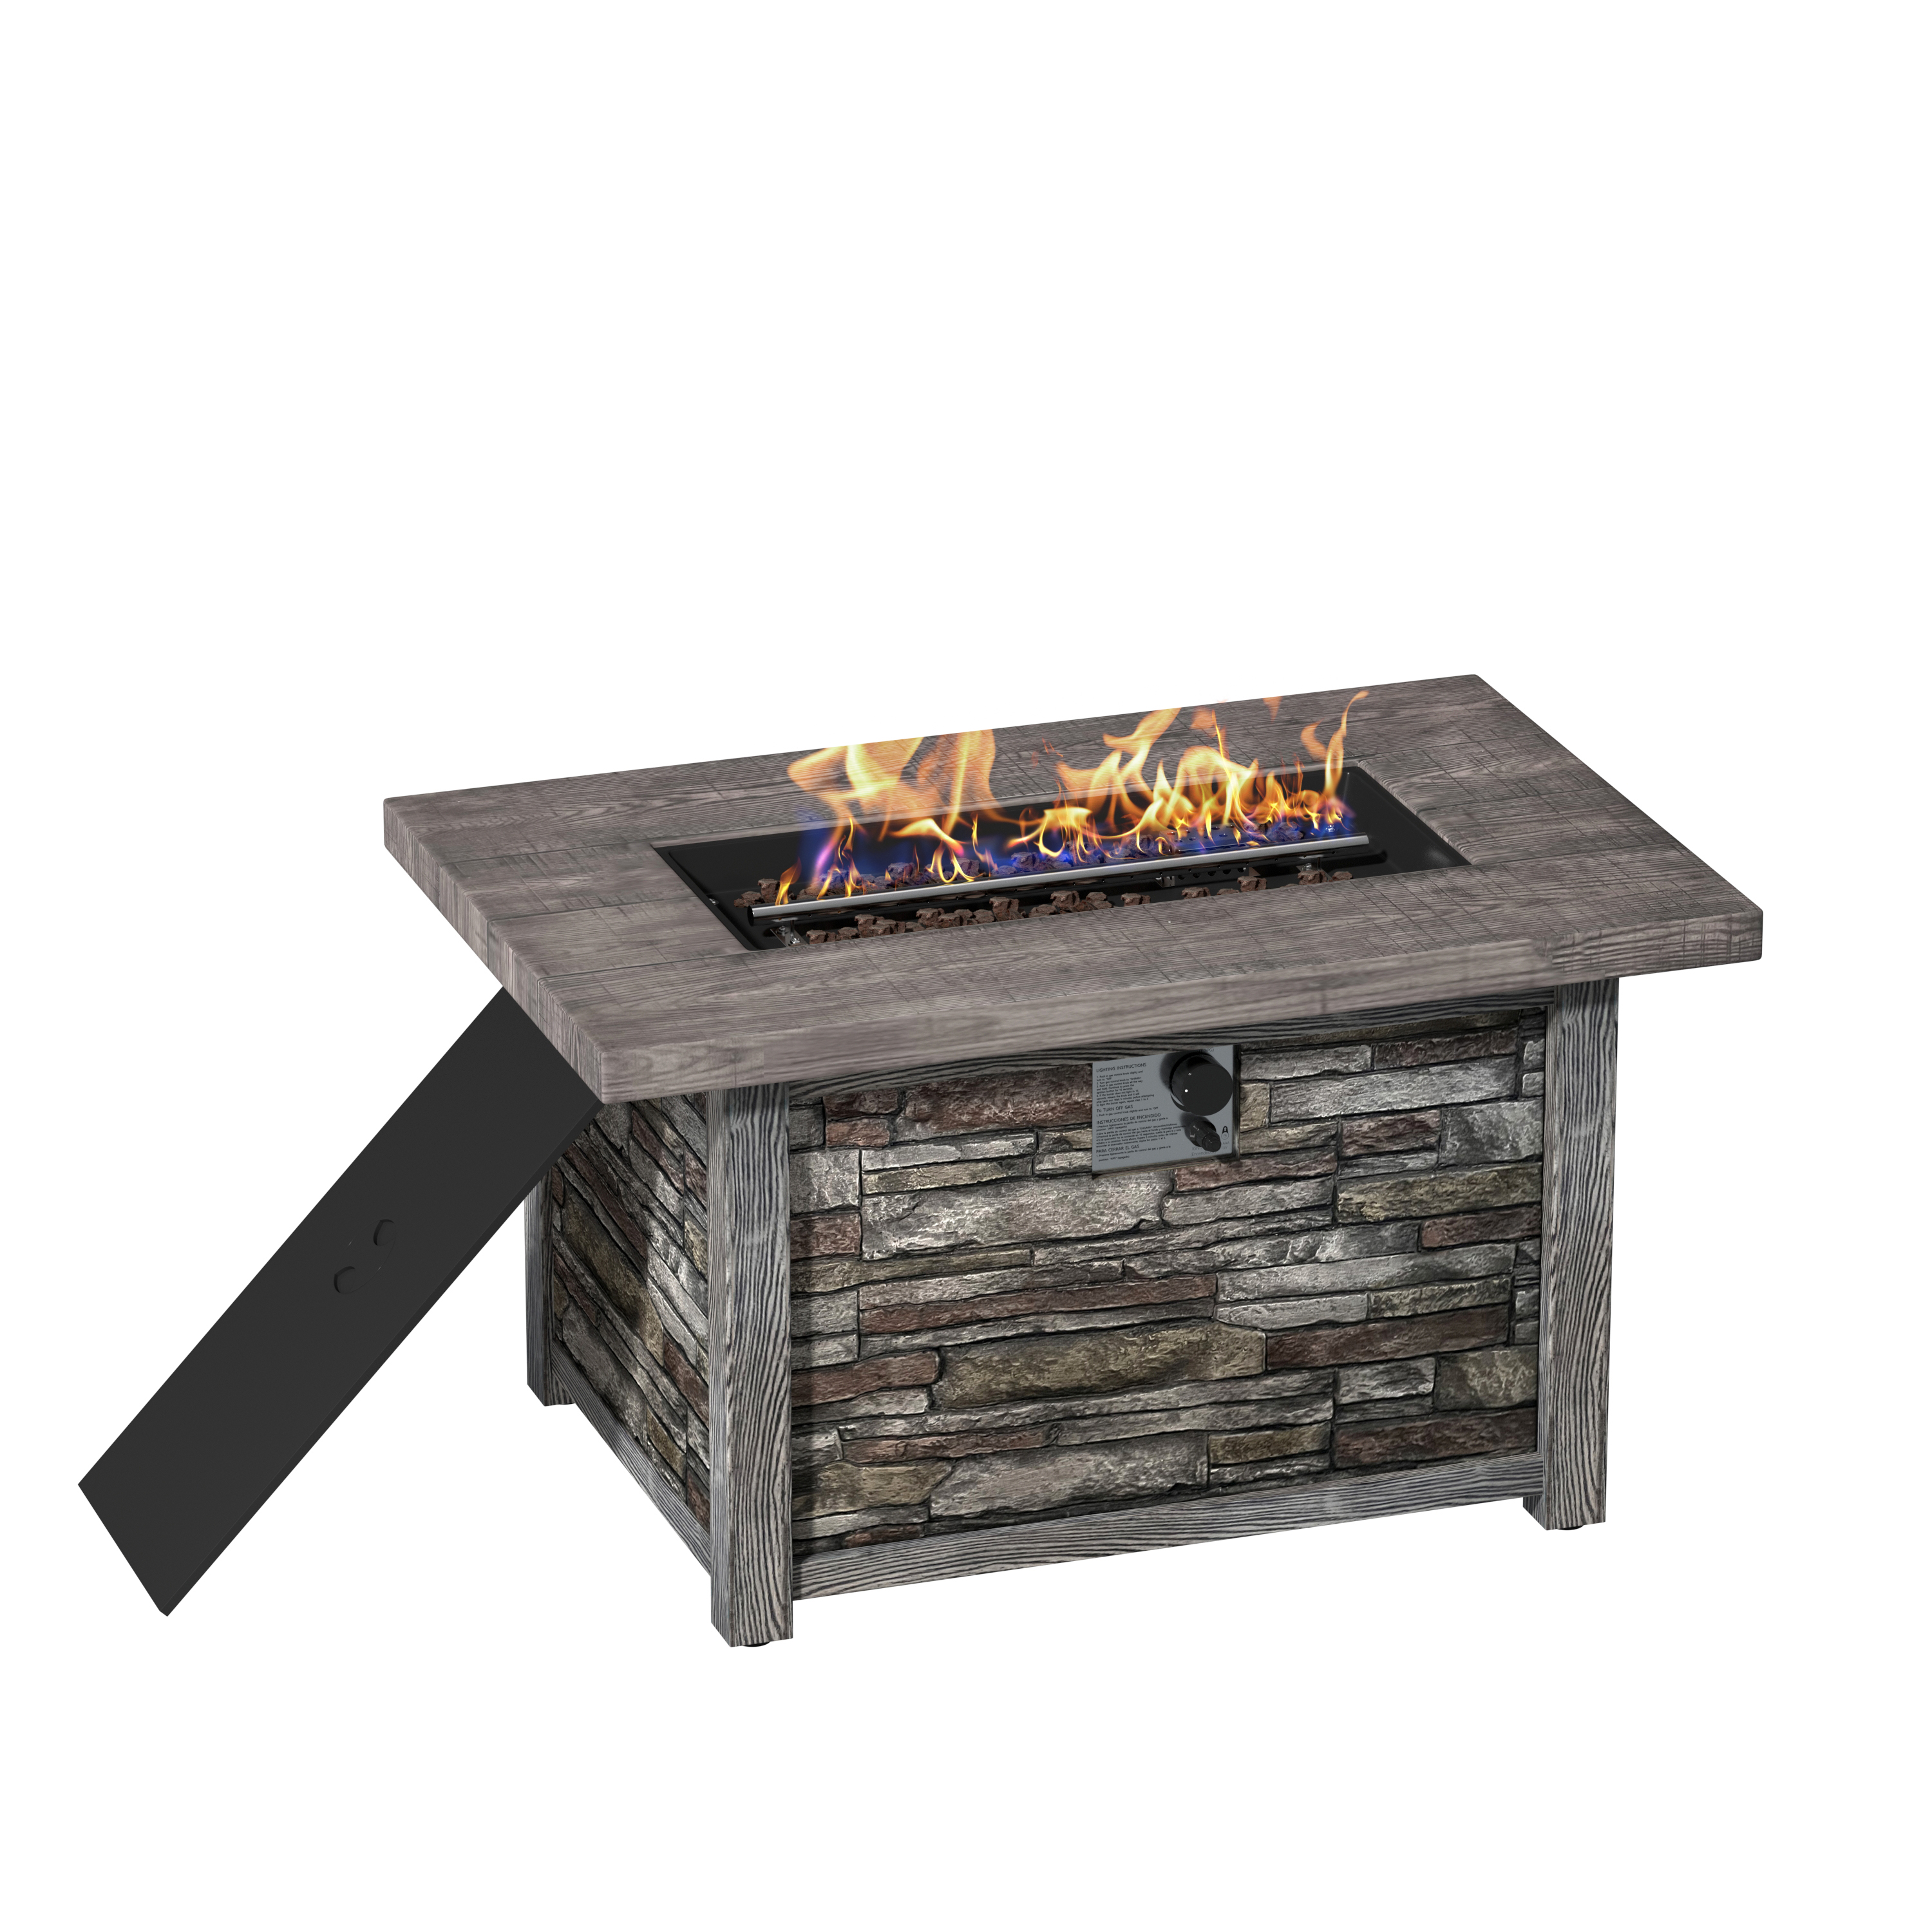 Mondawe 43.5 inch Propane Fire Pit Table with 50000 BTU Auto-Ignition Propane Gas Firepit with Waterproof Cover-Mondawe